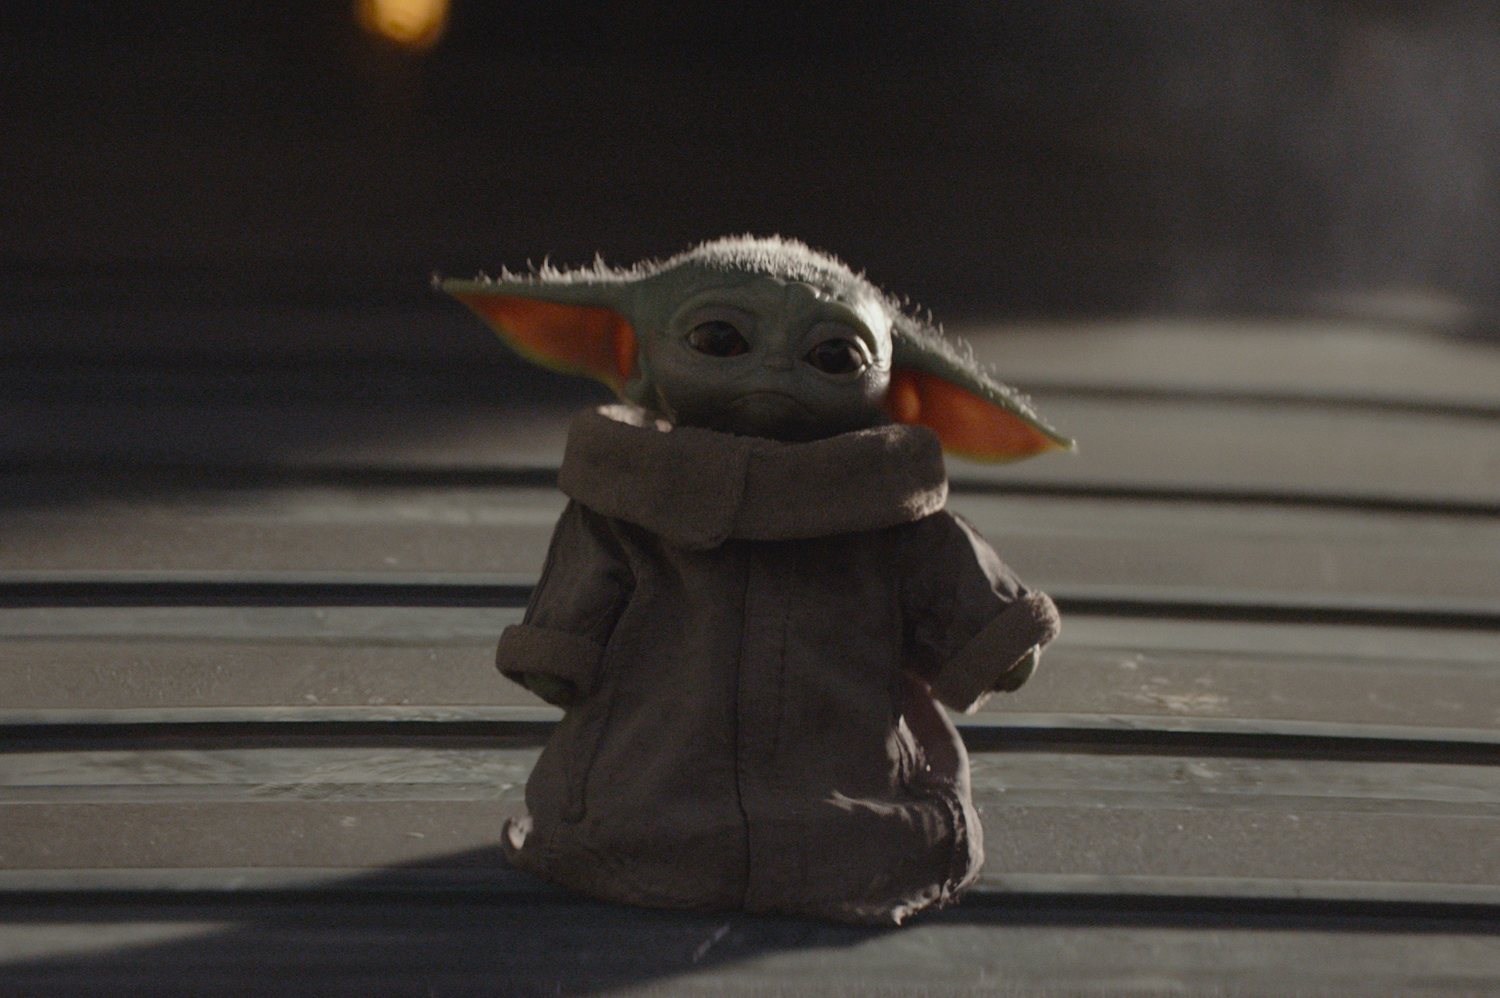 A Bunch of Baby Yoda Images in 'The Mandalorian